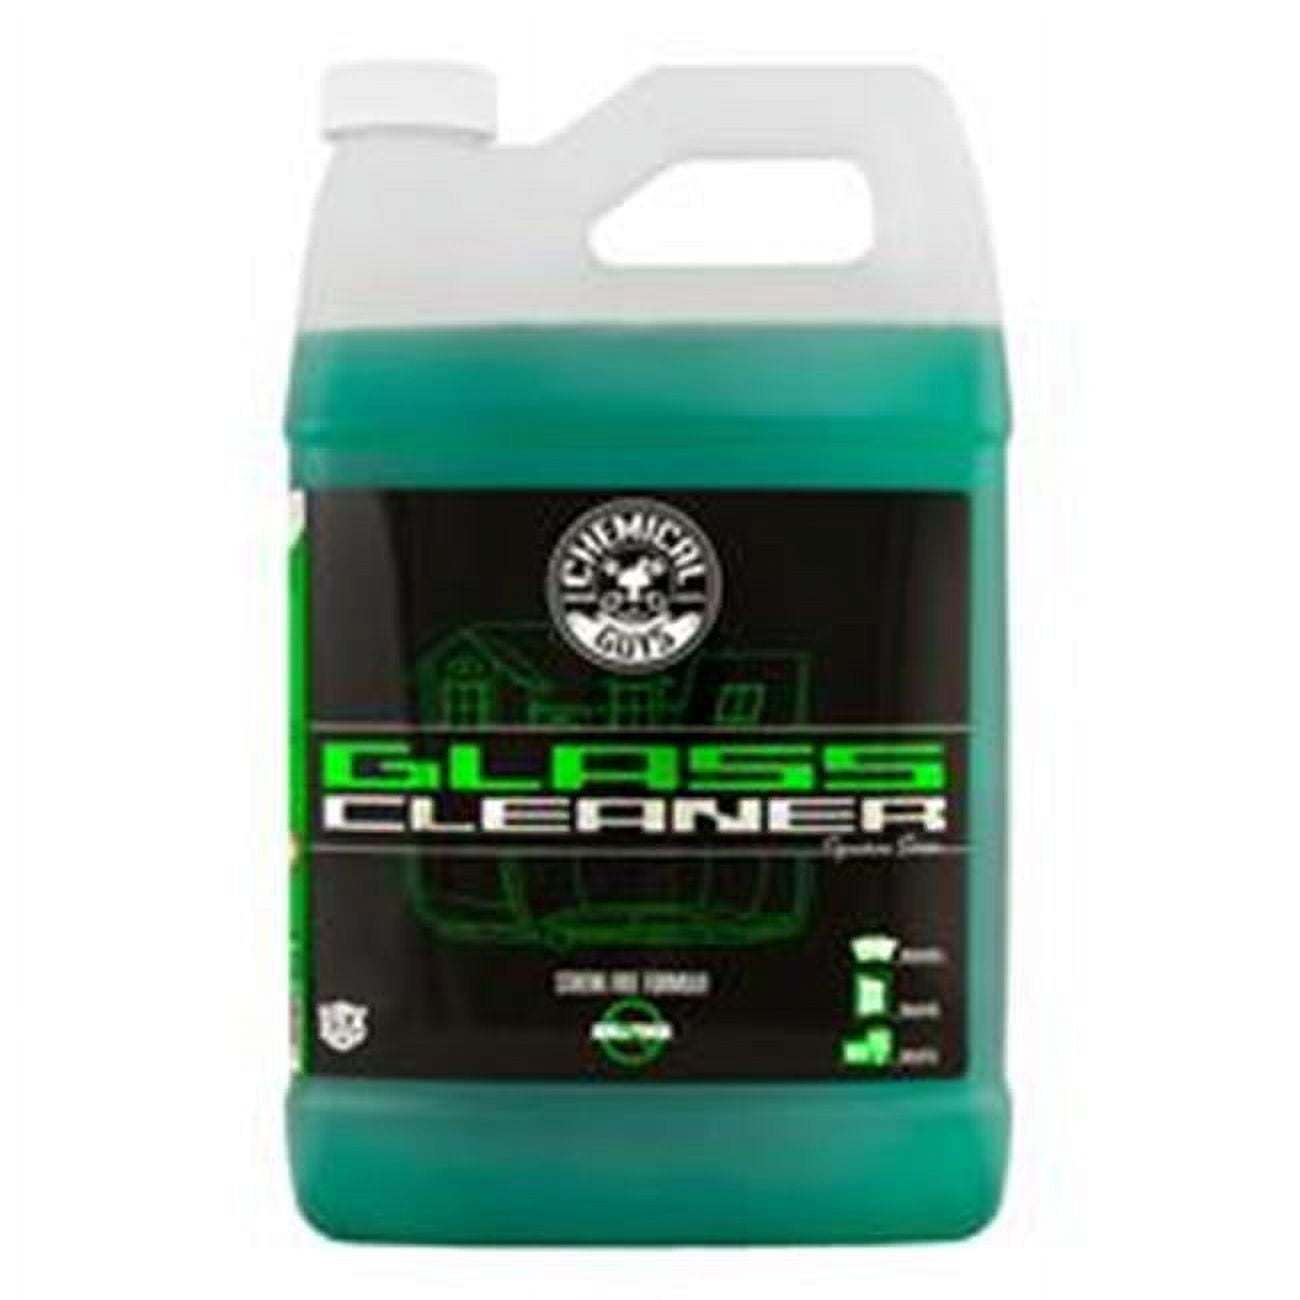 Chemical Guys Glassworkz Optical Clarity Cleaner 1Gal